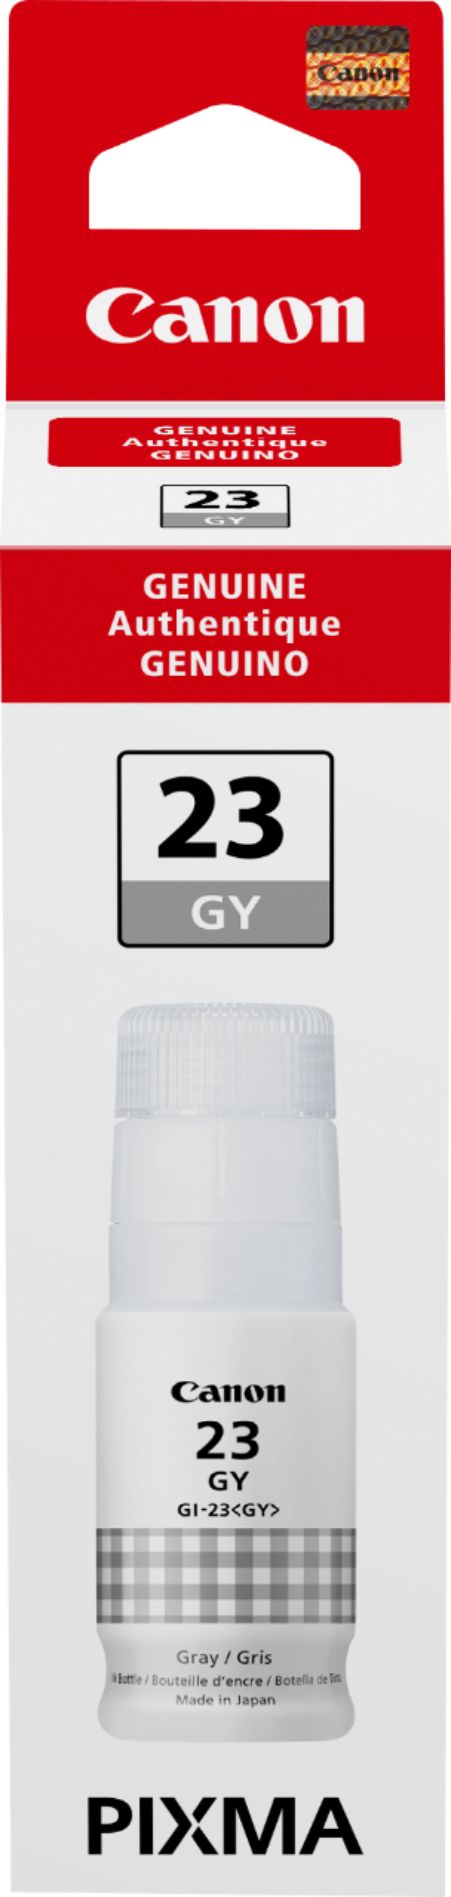 4705C001 Canon GI-23 Grey Ink Bottle-Compatible with G620 only